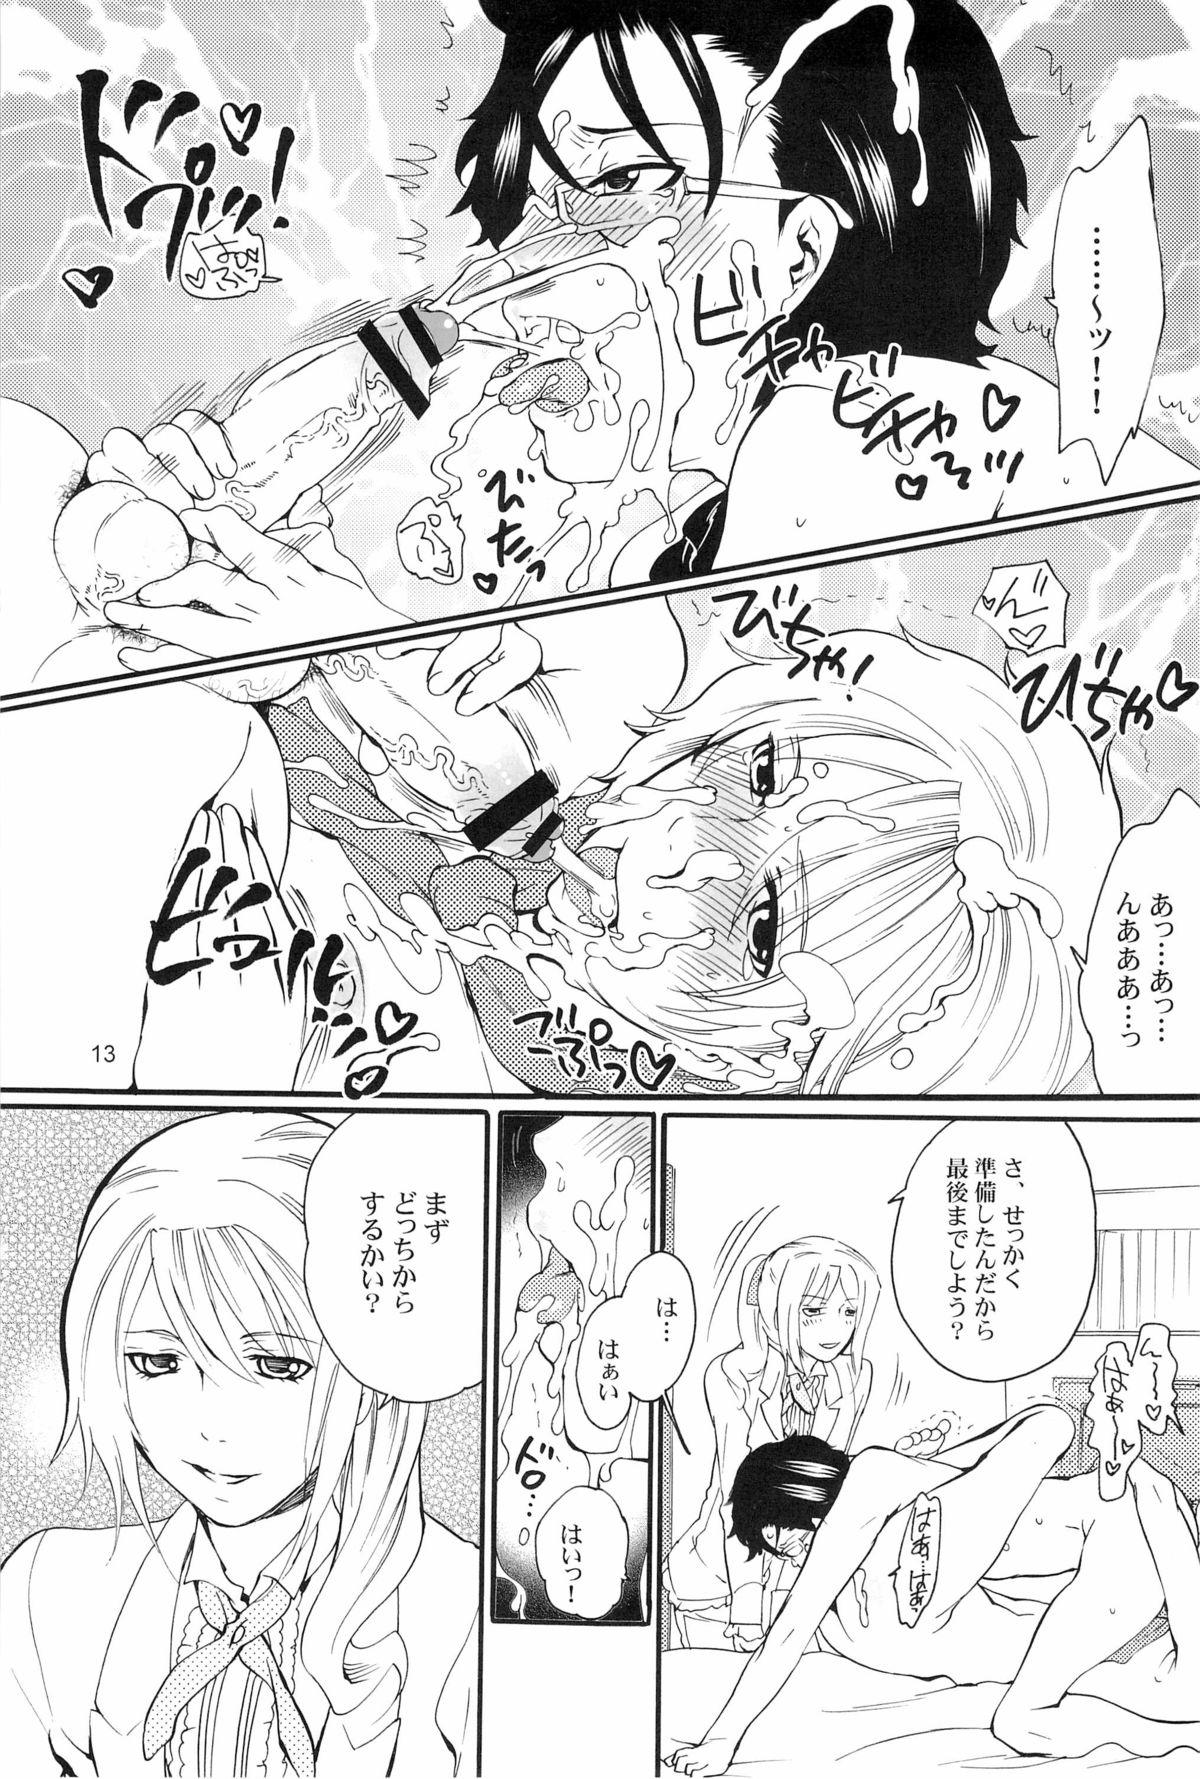 Whores DT Kouryakuhon - Starry sky Cocksucking - Page 13